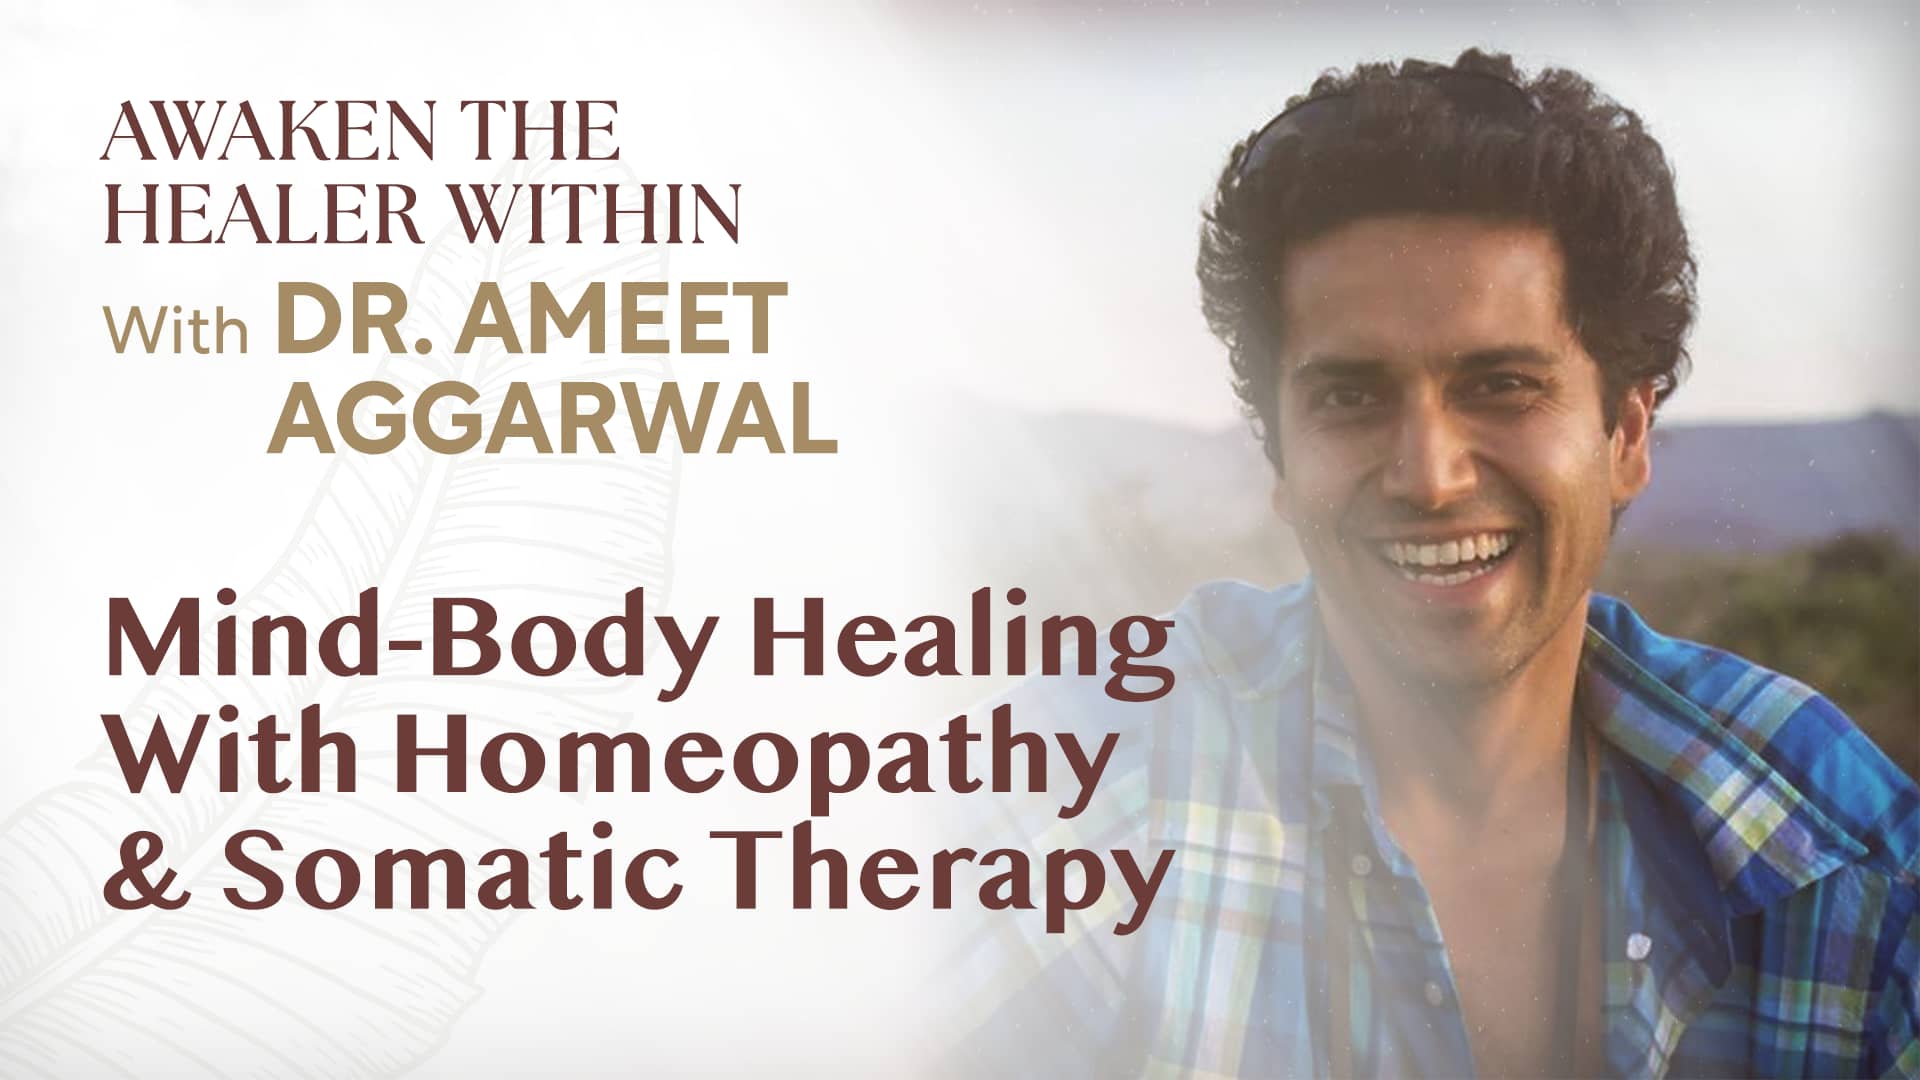 Mind-Body Healing With Homeopathy & Somatic Therapy